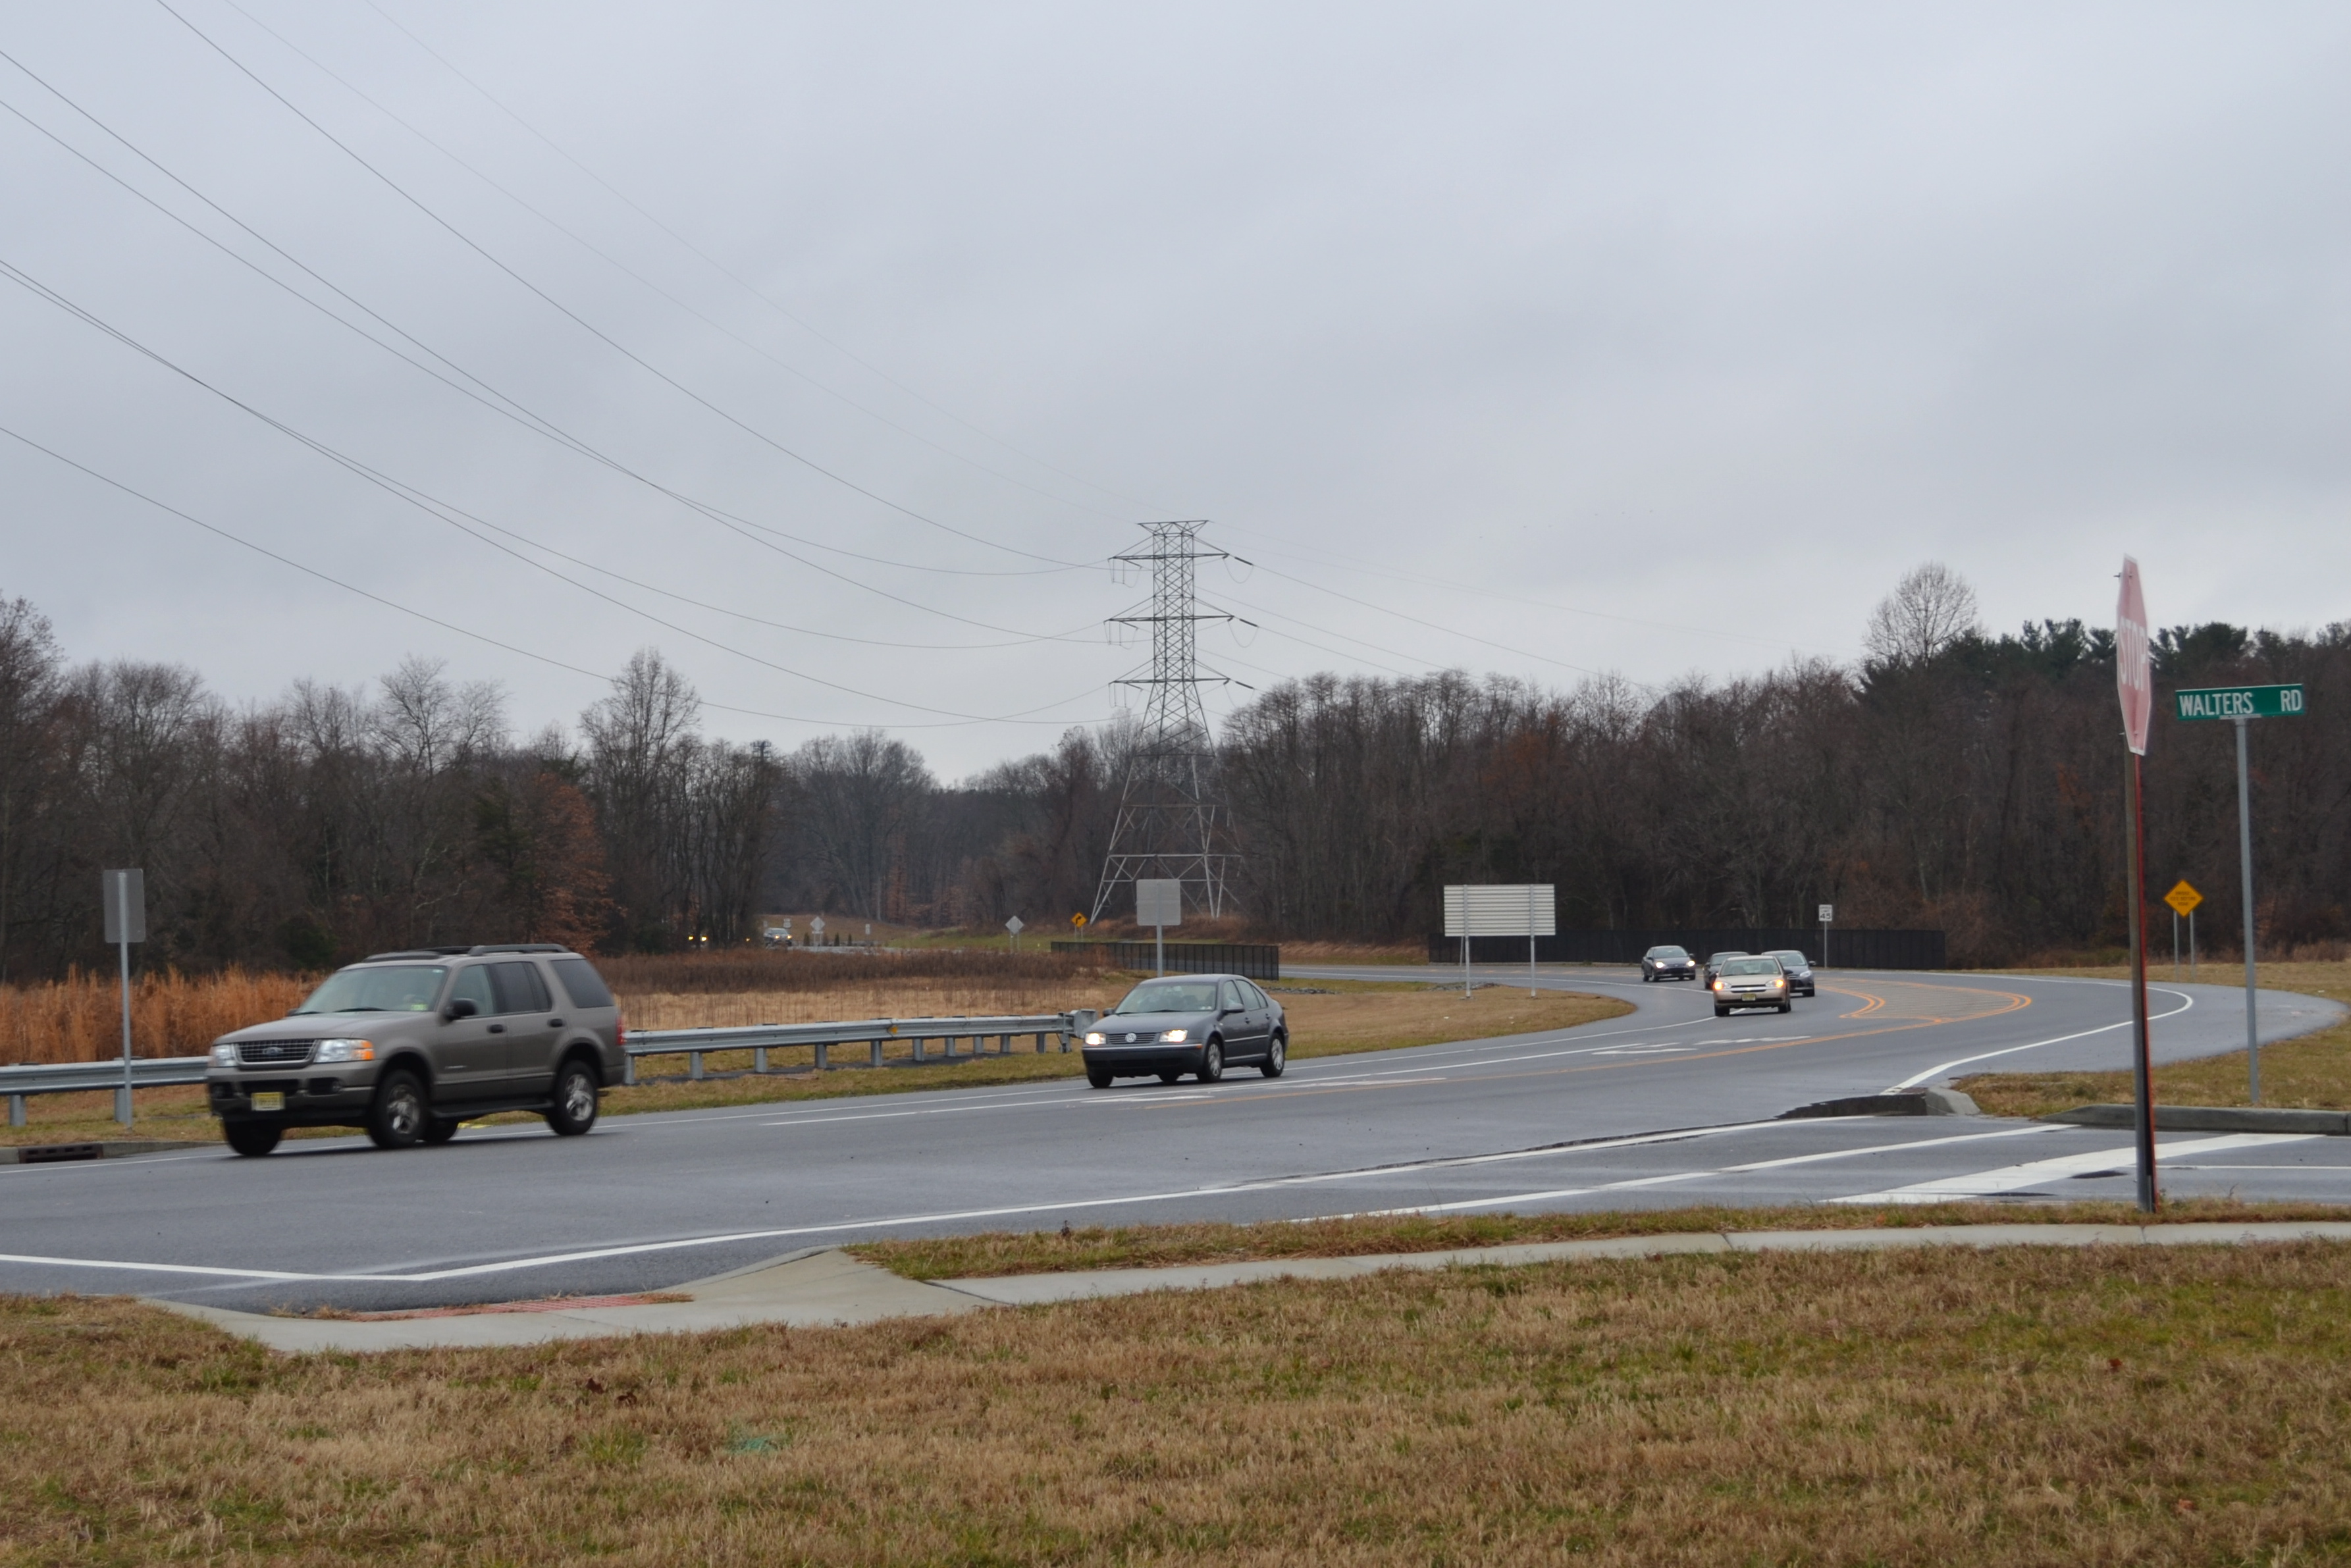 The Mullica Hill Bypass is one transportation project listed in Connections 2035 that was successfully completed